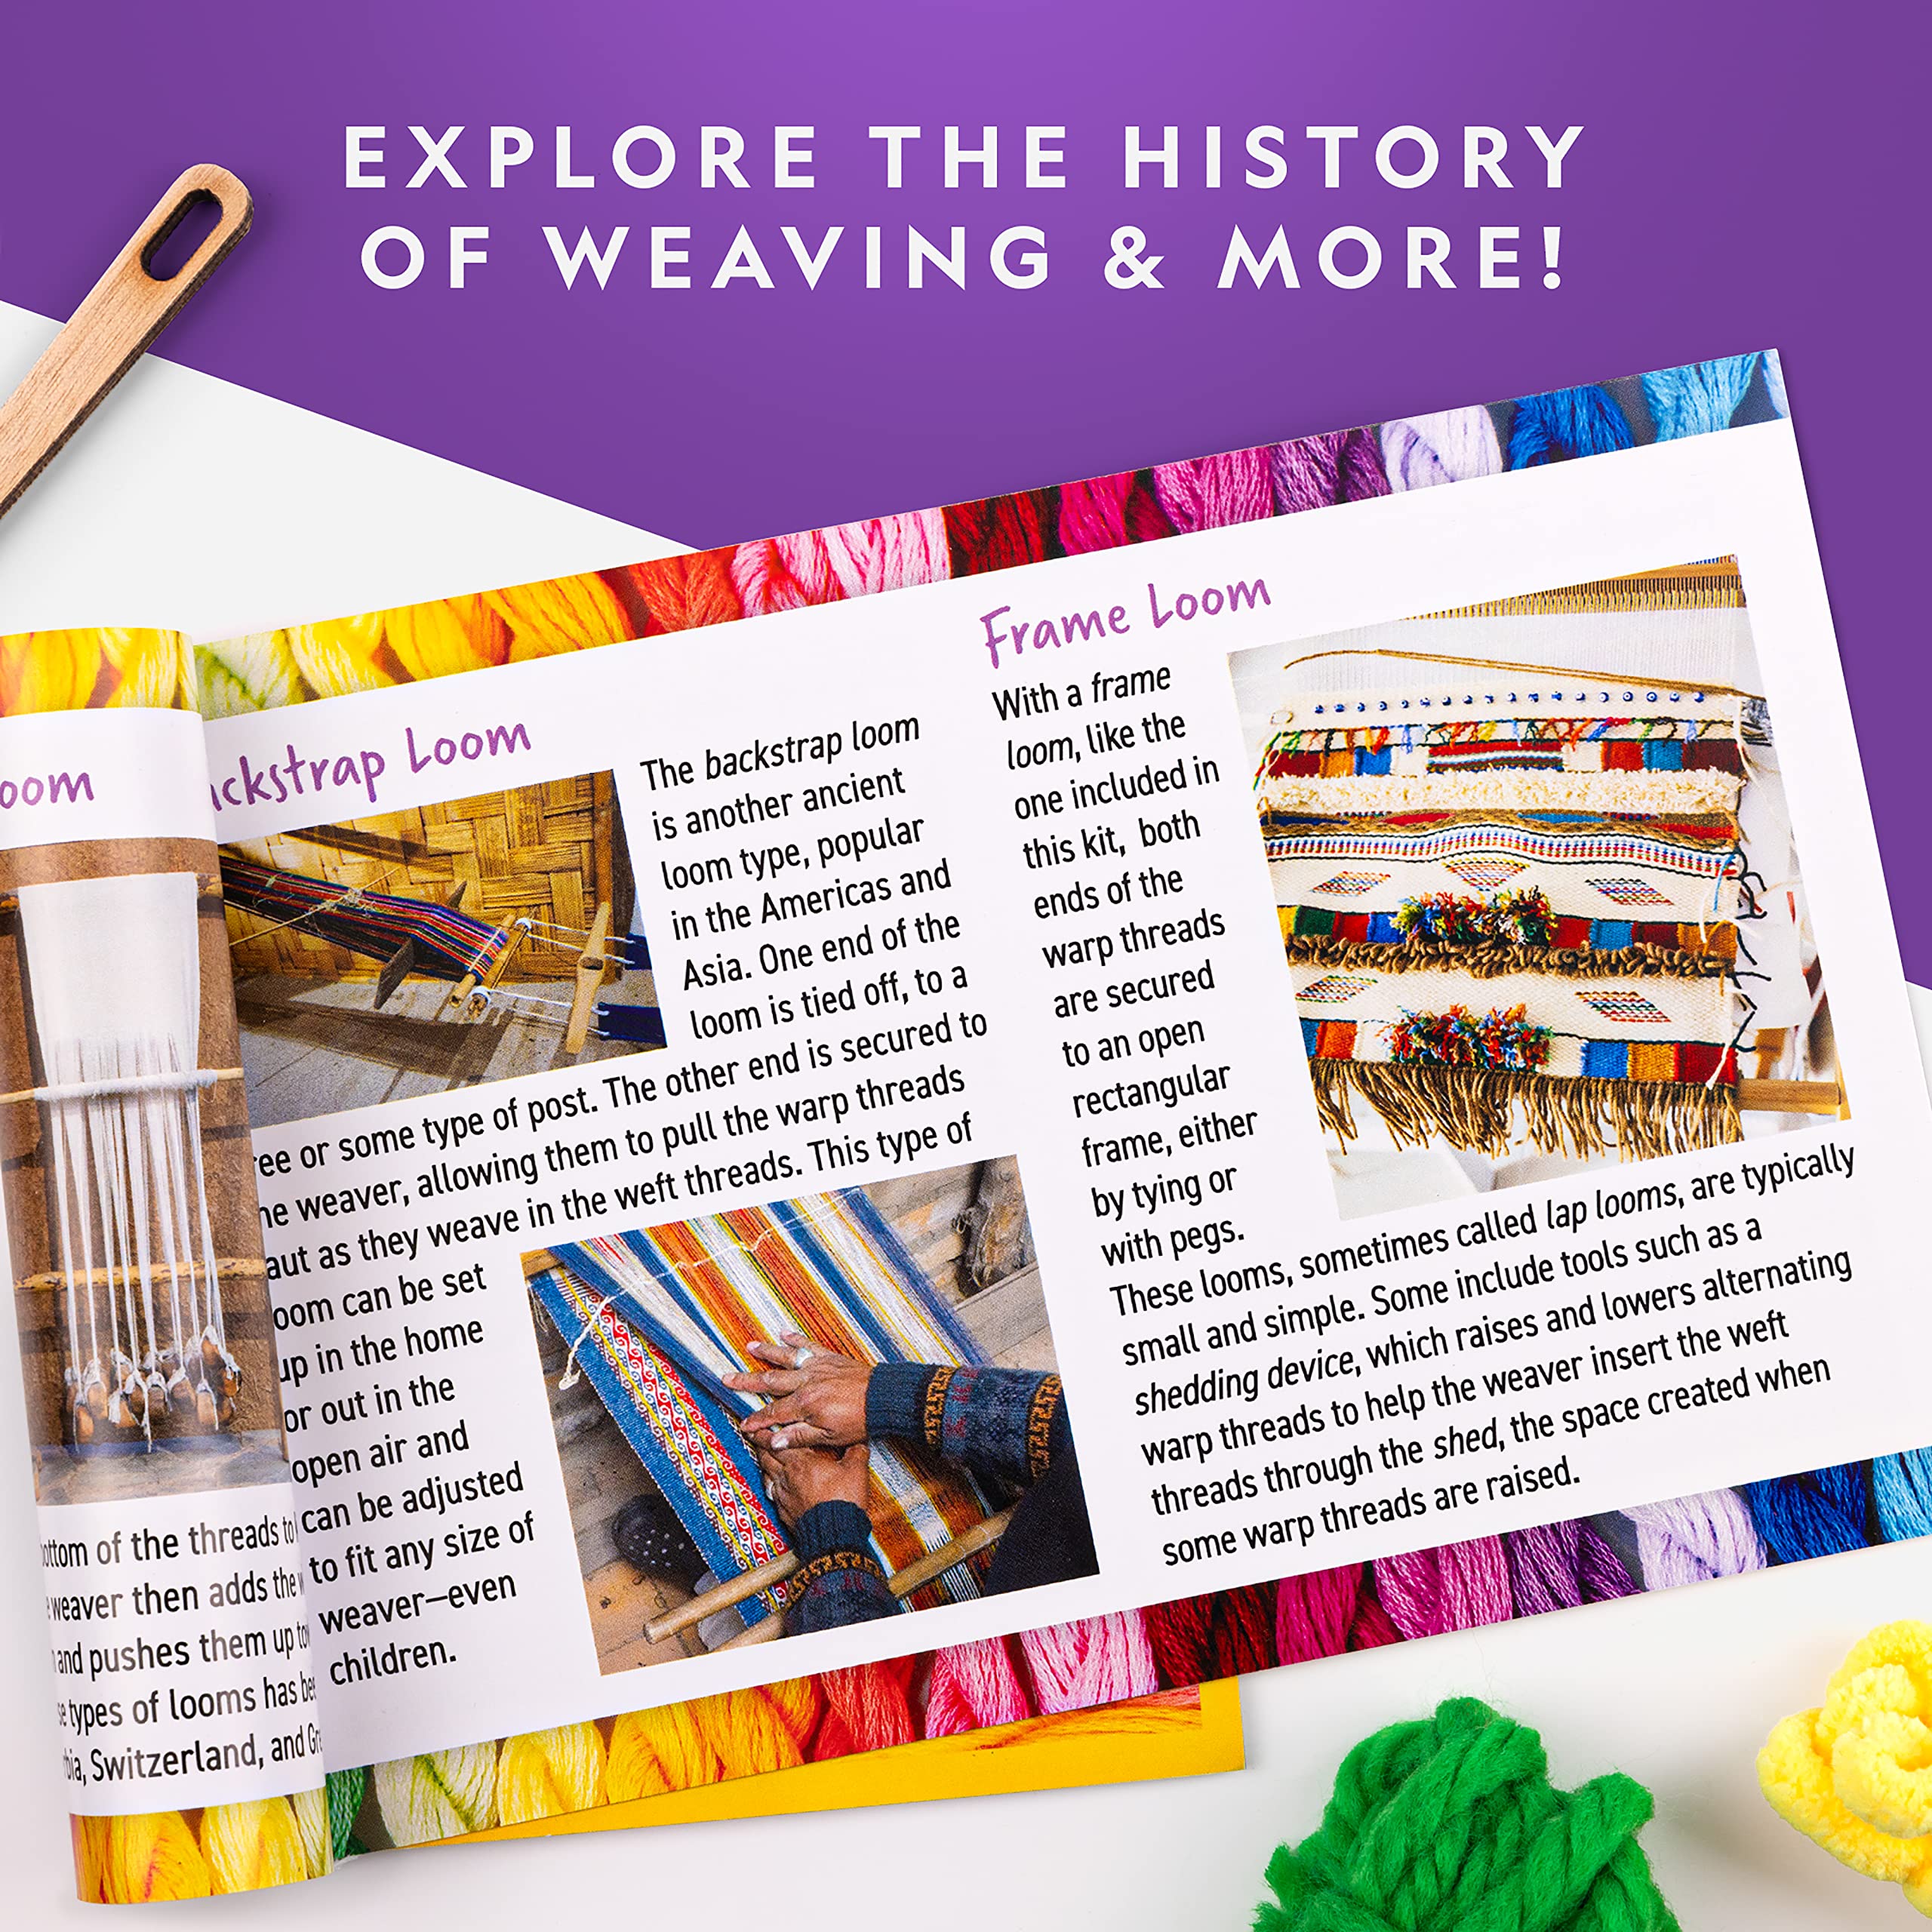 NATIONAL GEOGRAPHIC Kids Weaving Kit - Arts and Crafts Loom Weaving Kit for Kids with Wooden Loom, Yarn & 3 Fun Designs Kids Can Easily Weave, Easy Weaving Loom for Kids, Child Weaving Set, Kids Loom